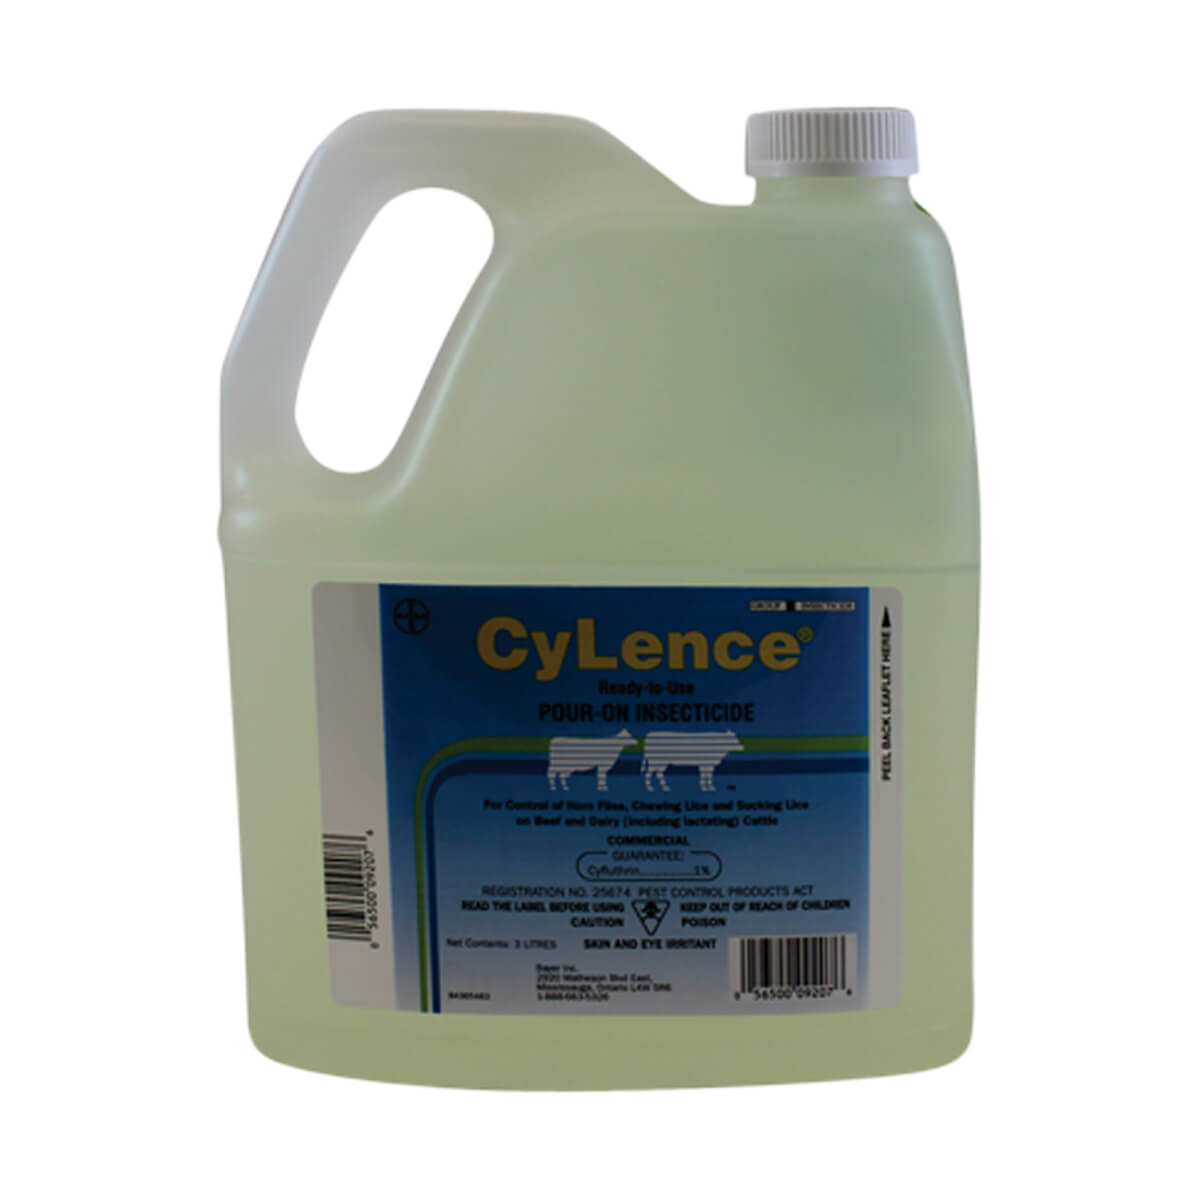 CyLence Pour-On Insecticide - 3 L